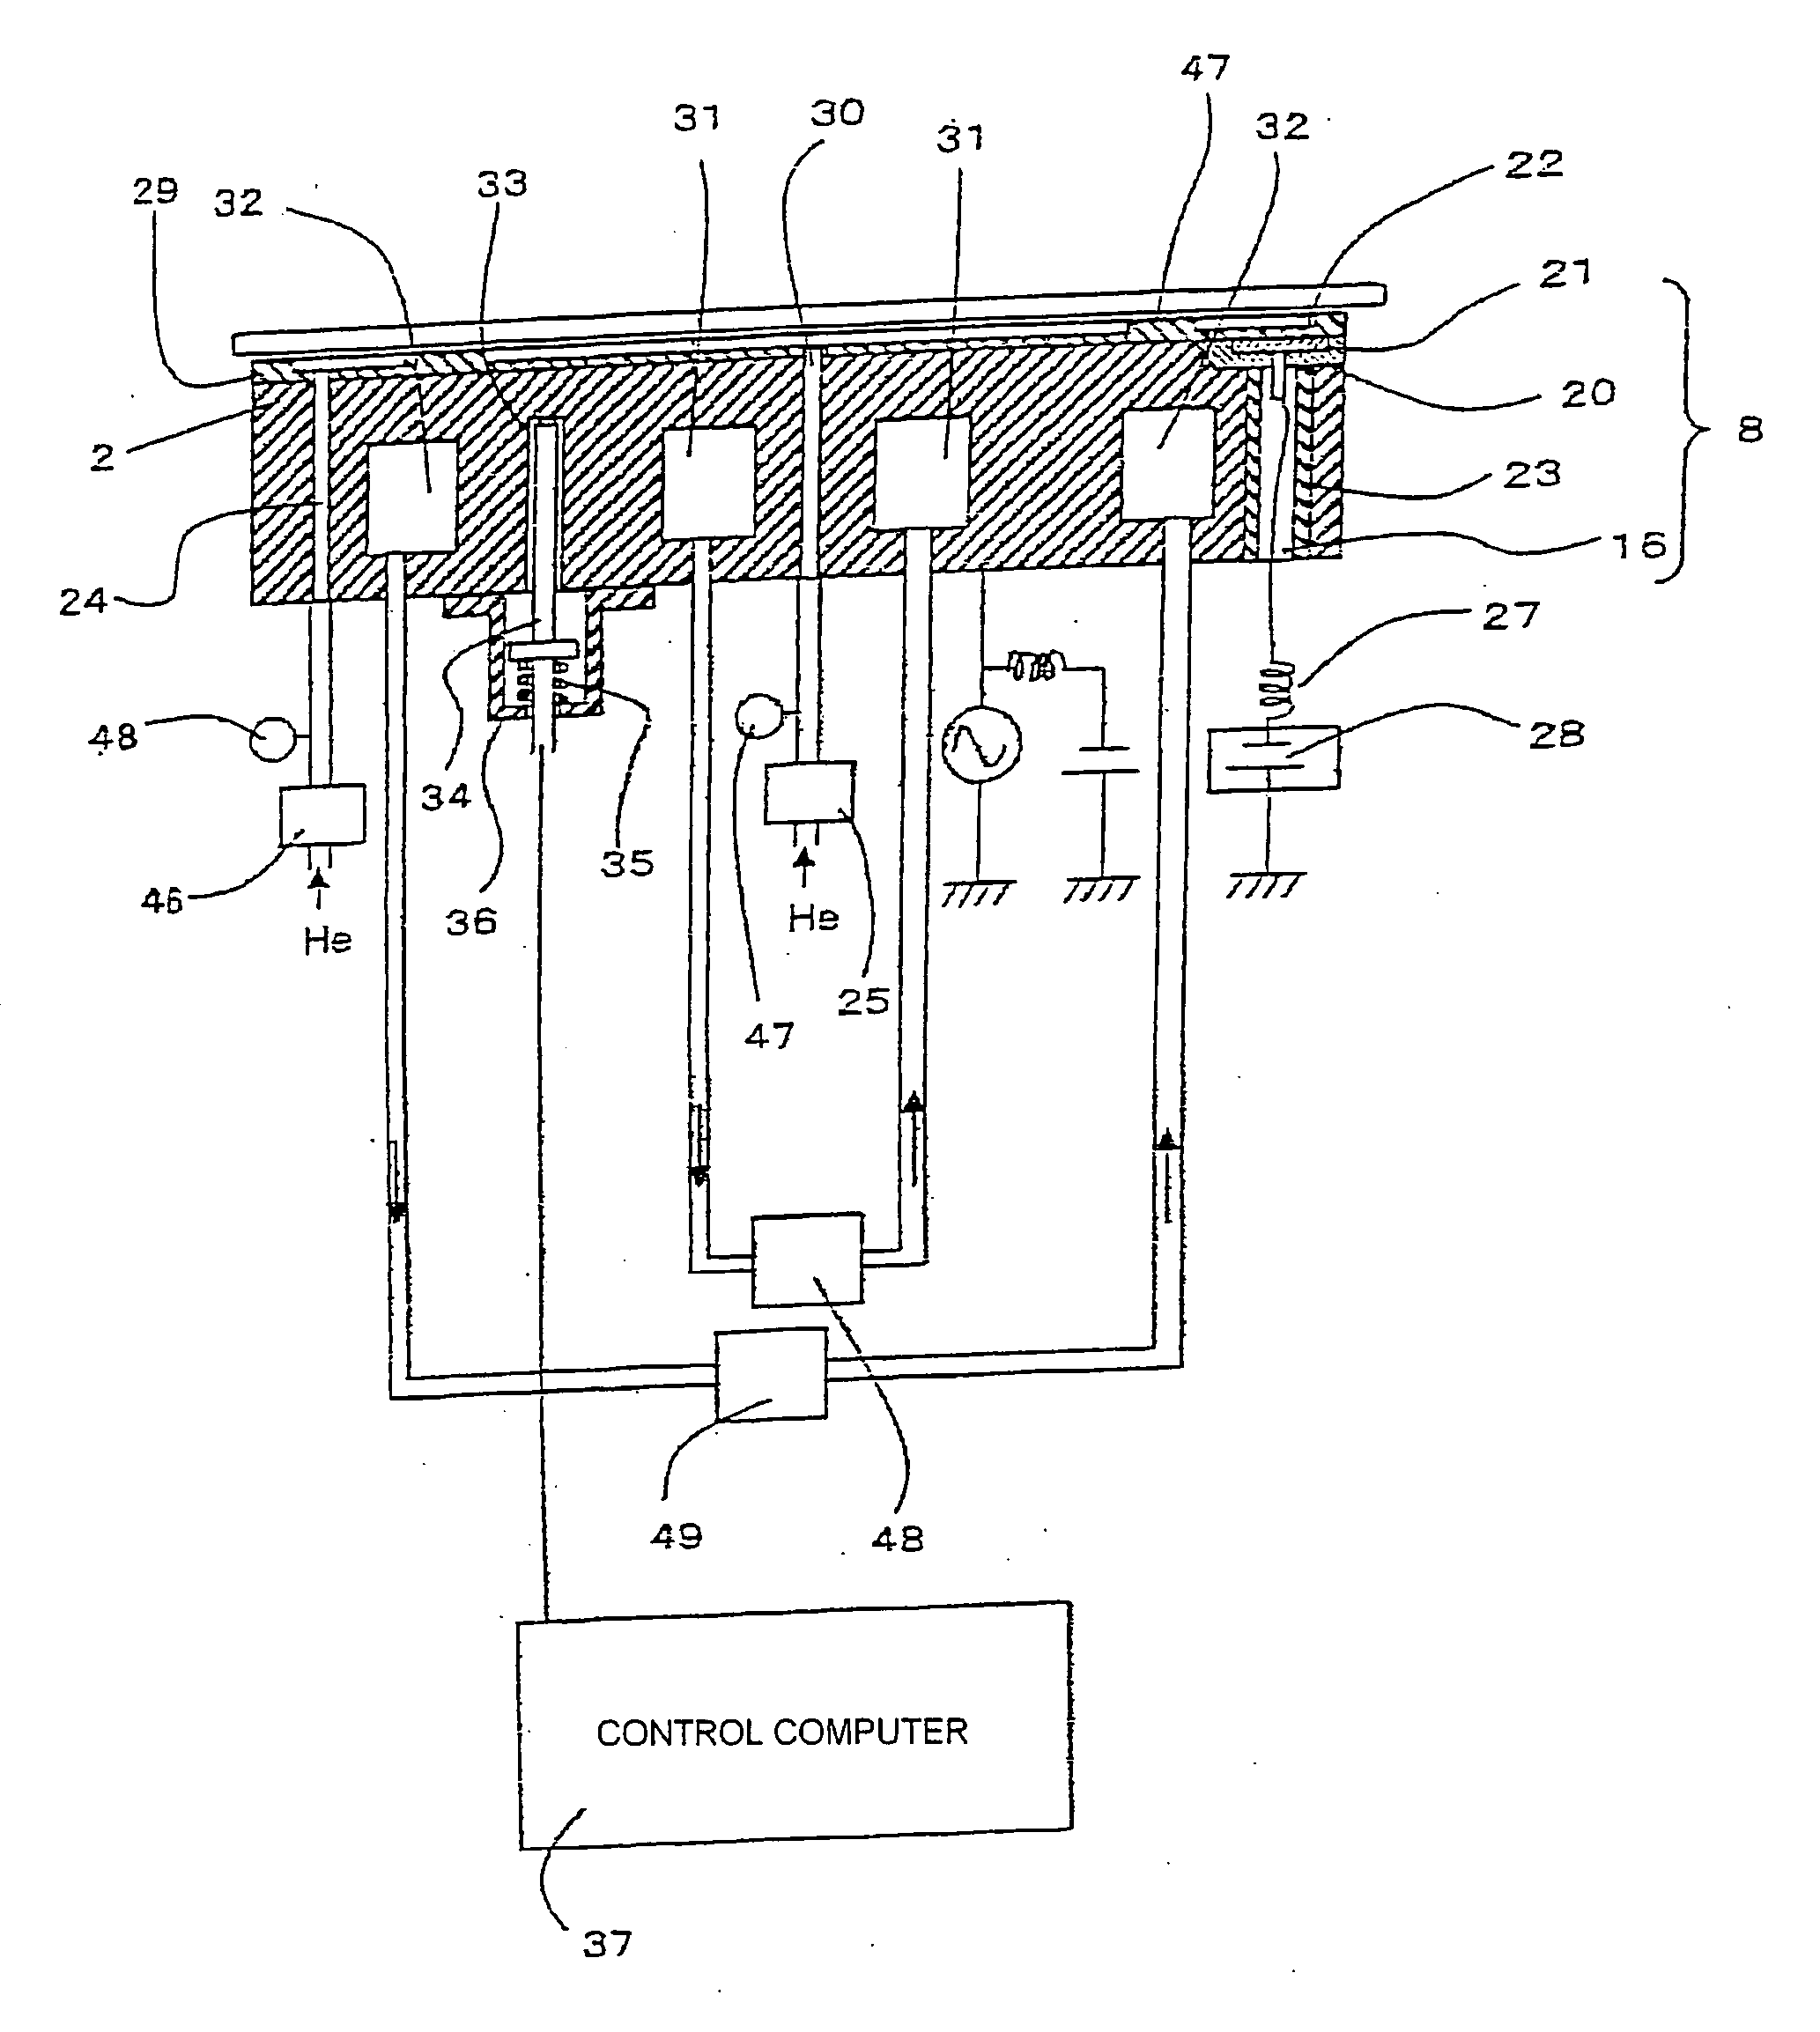 Apparatus and method for processing wafer